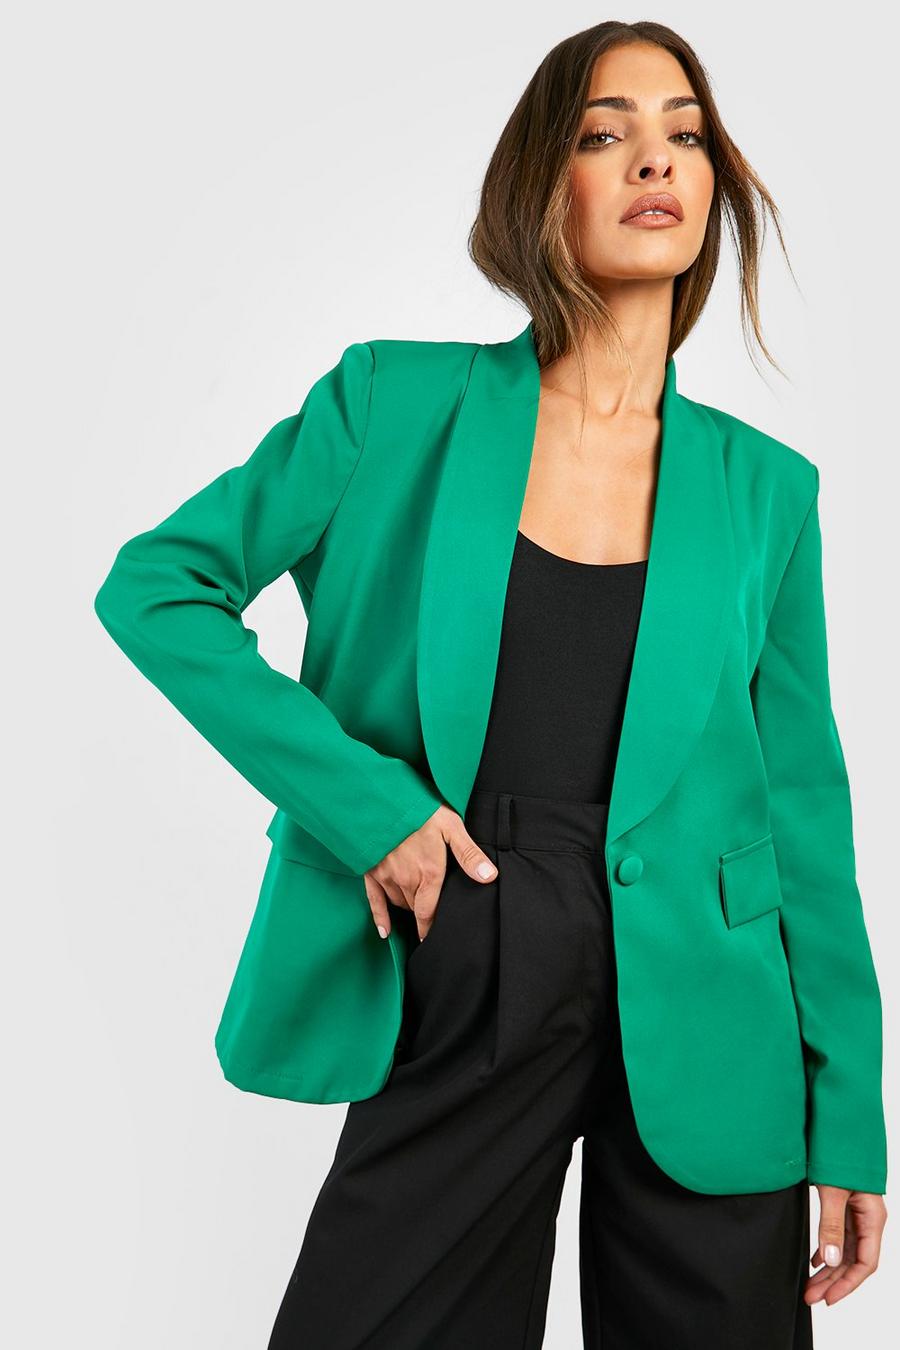 Bright green Basic Woven Single Breasted Plunge Lapel Blazer